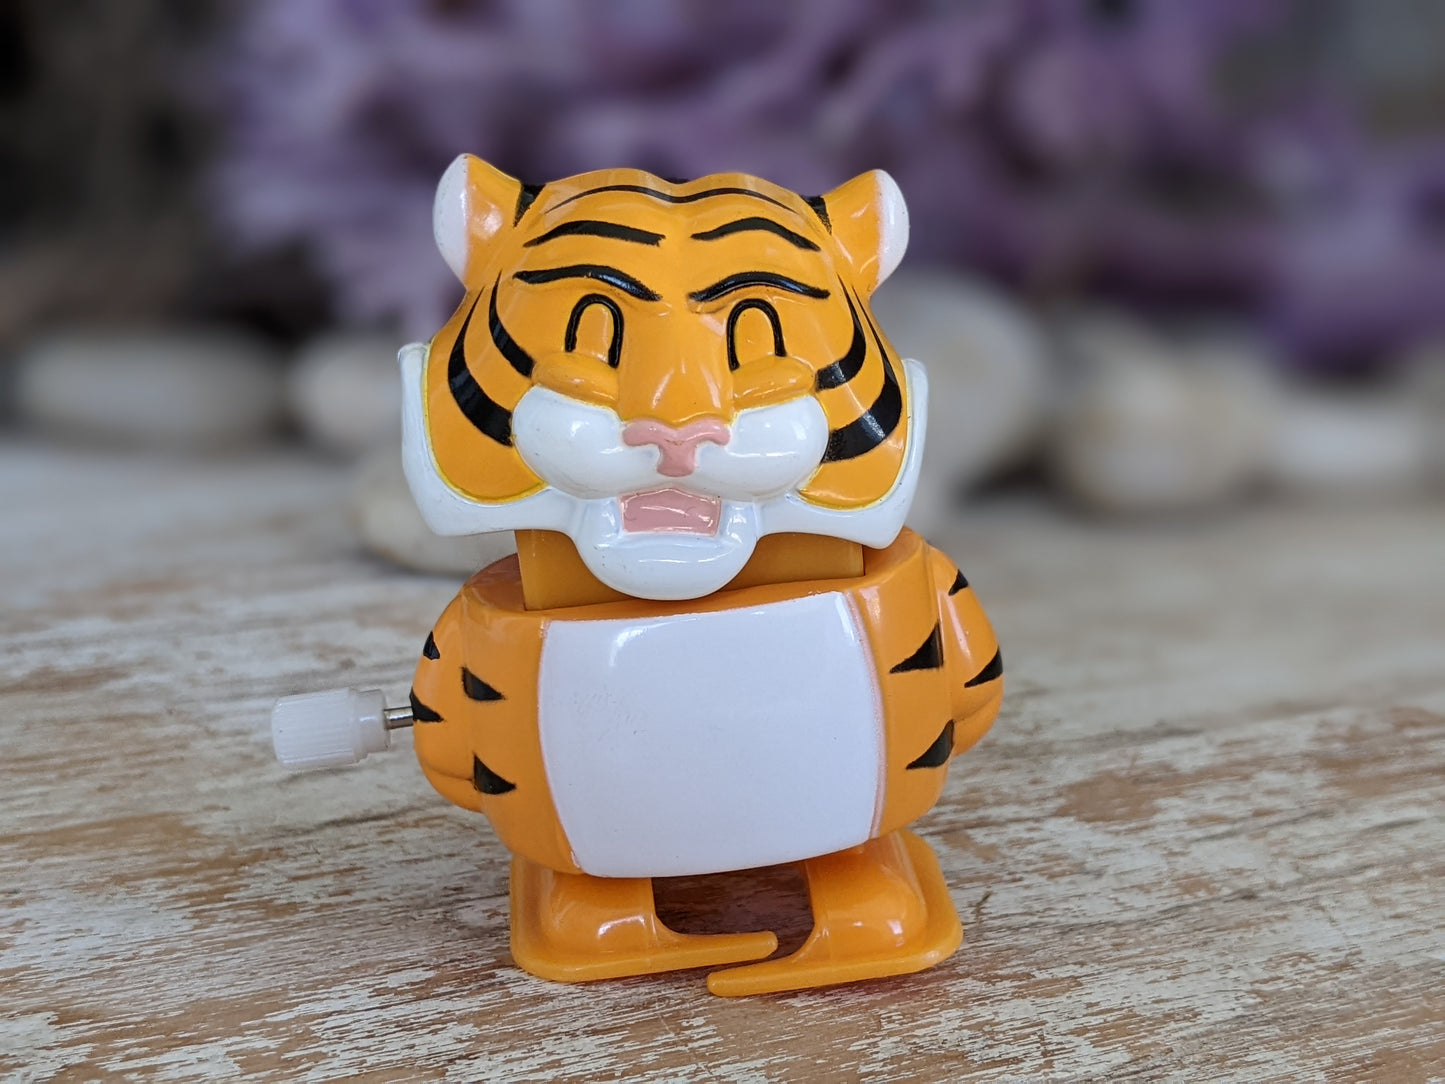 1980s Tiger Wind-Up Toy Wobbling Head & Walking Working !! Amazing Vintage Gifts !! Retro Gift Ideas !!